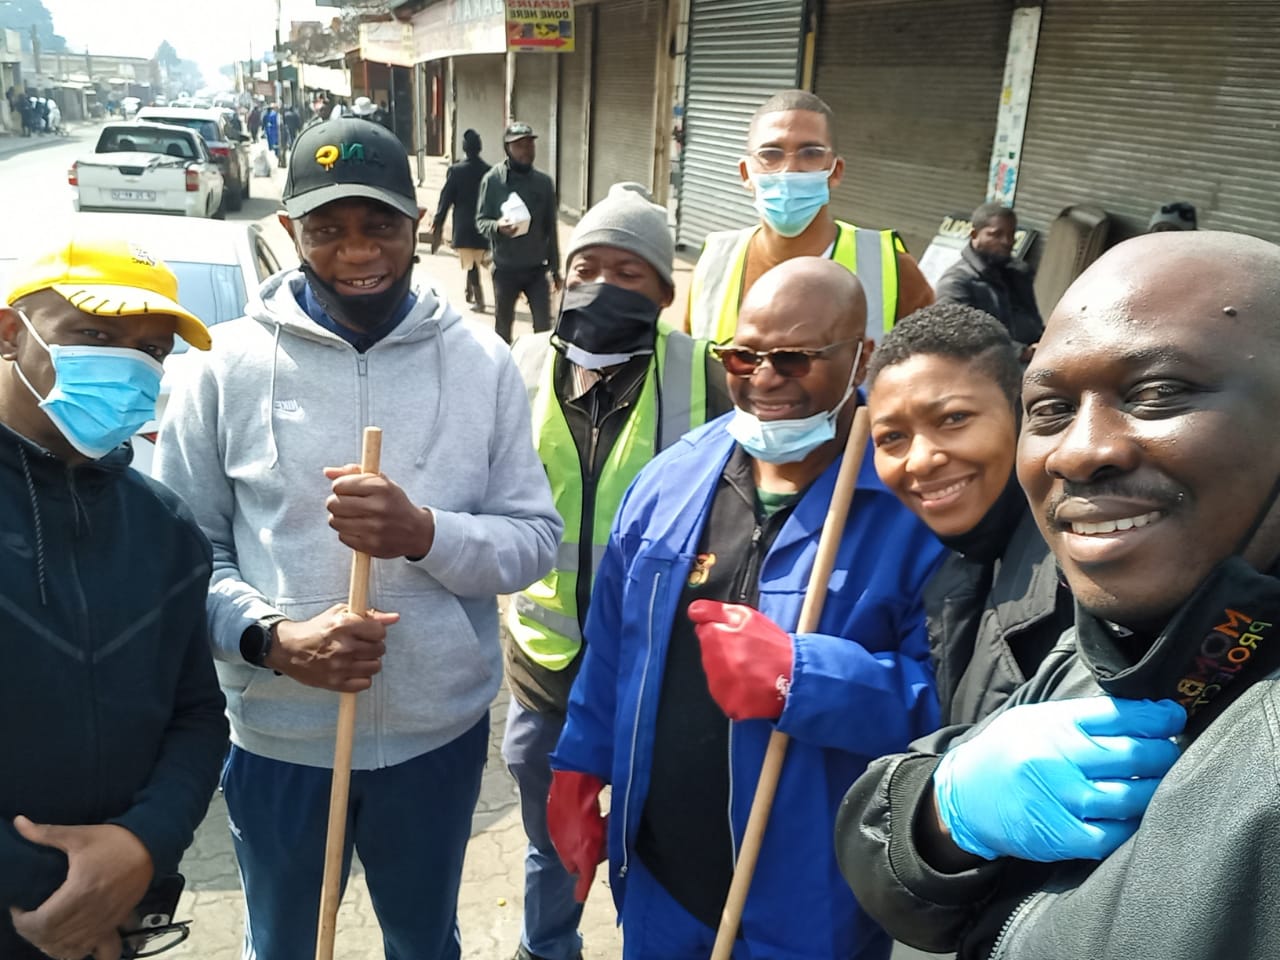 More than 2000 community members risked their lives in Alexandra